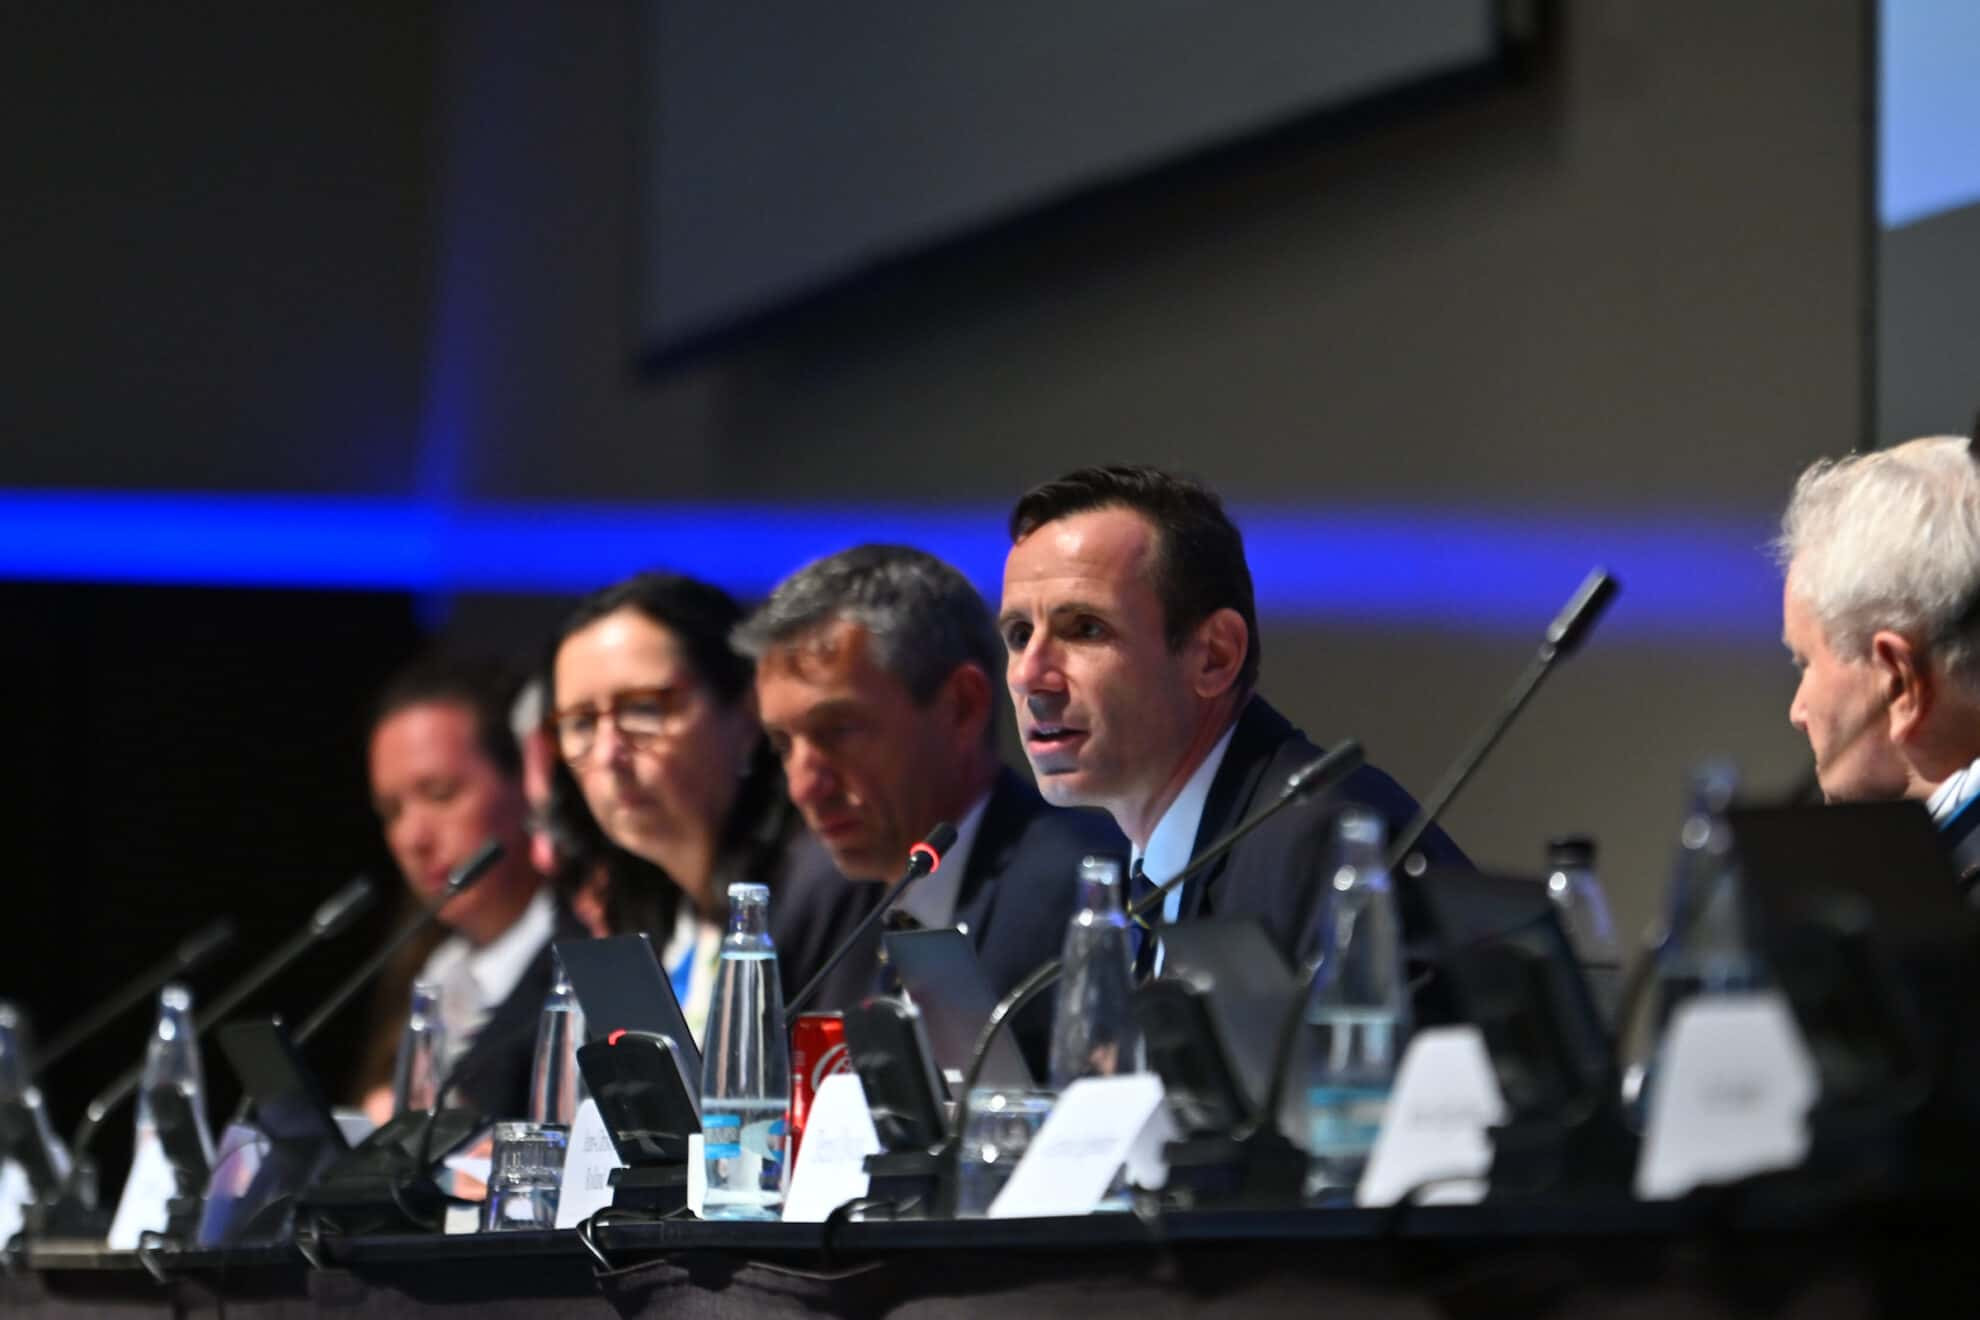 World Rowing President Jean-Christophe Rolland, second right, opened the Congress in Prague ©World Rowing